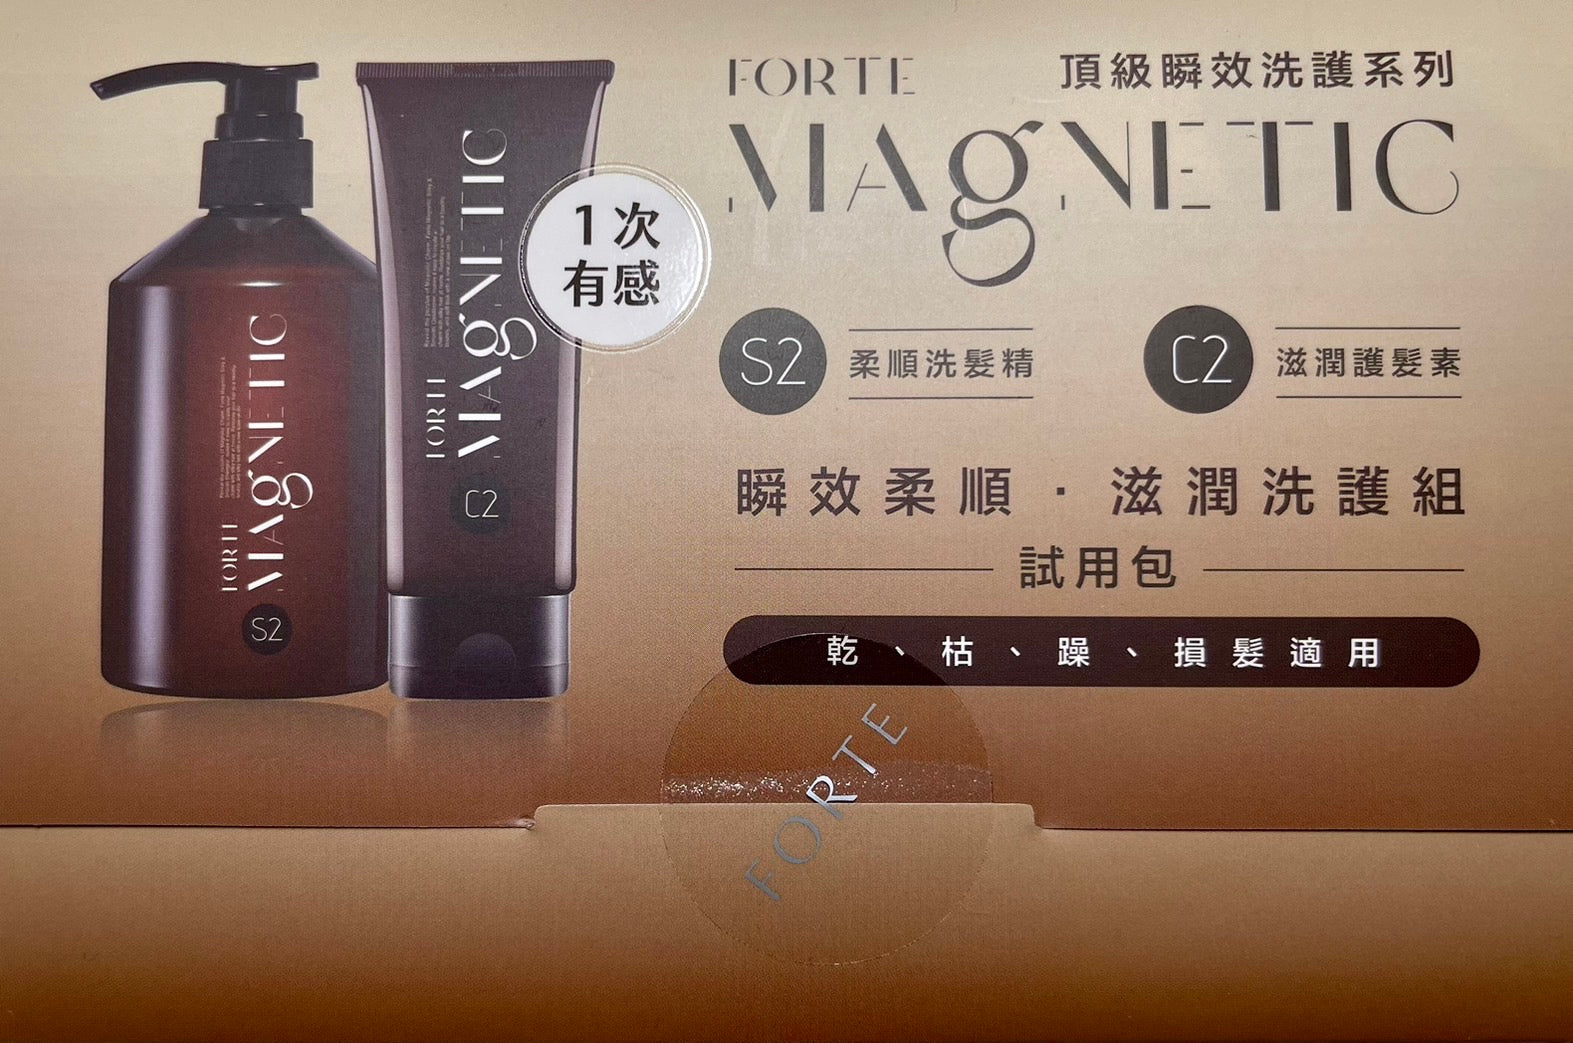 FORTE Magnetic頂級瞬效洗護-洗護試用包